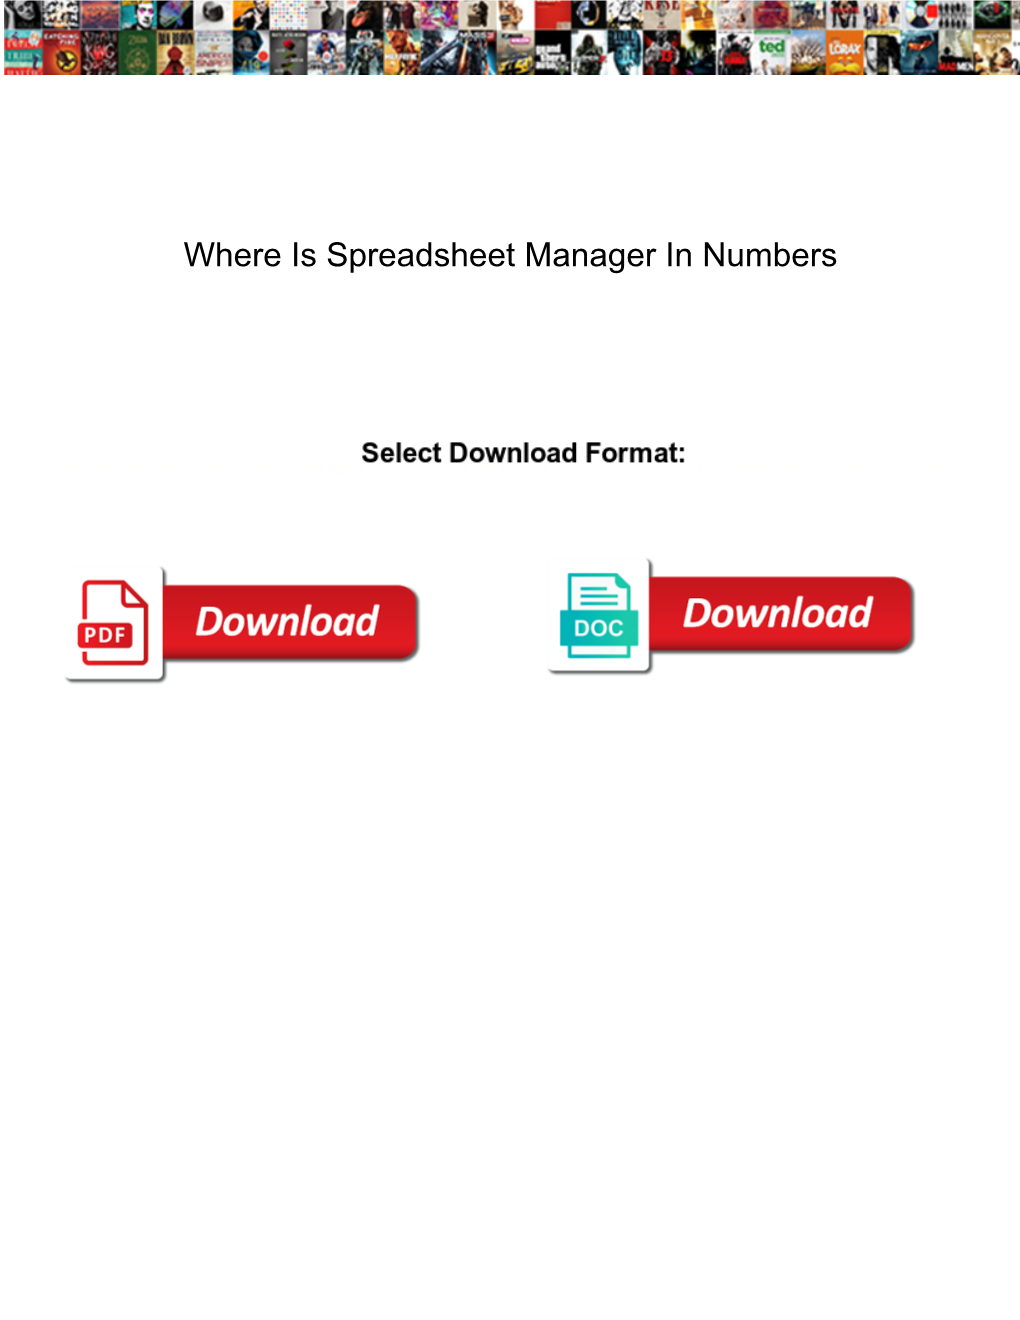 Where Is Spreadsheet Manager in Numbers